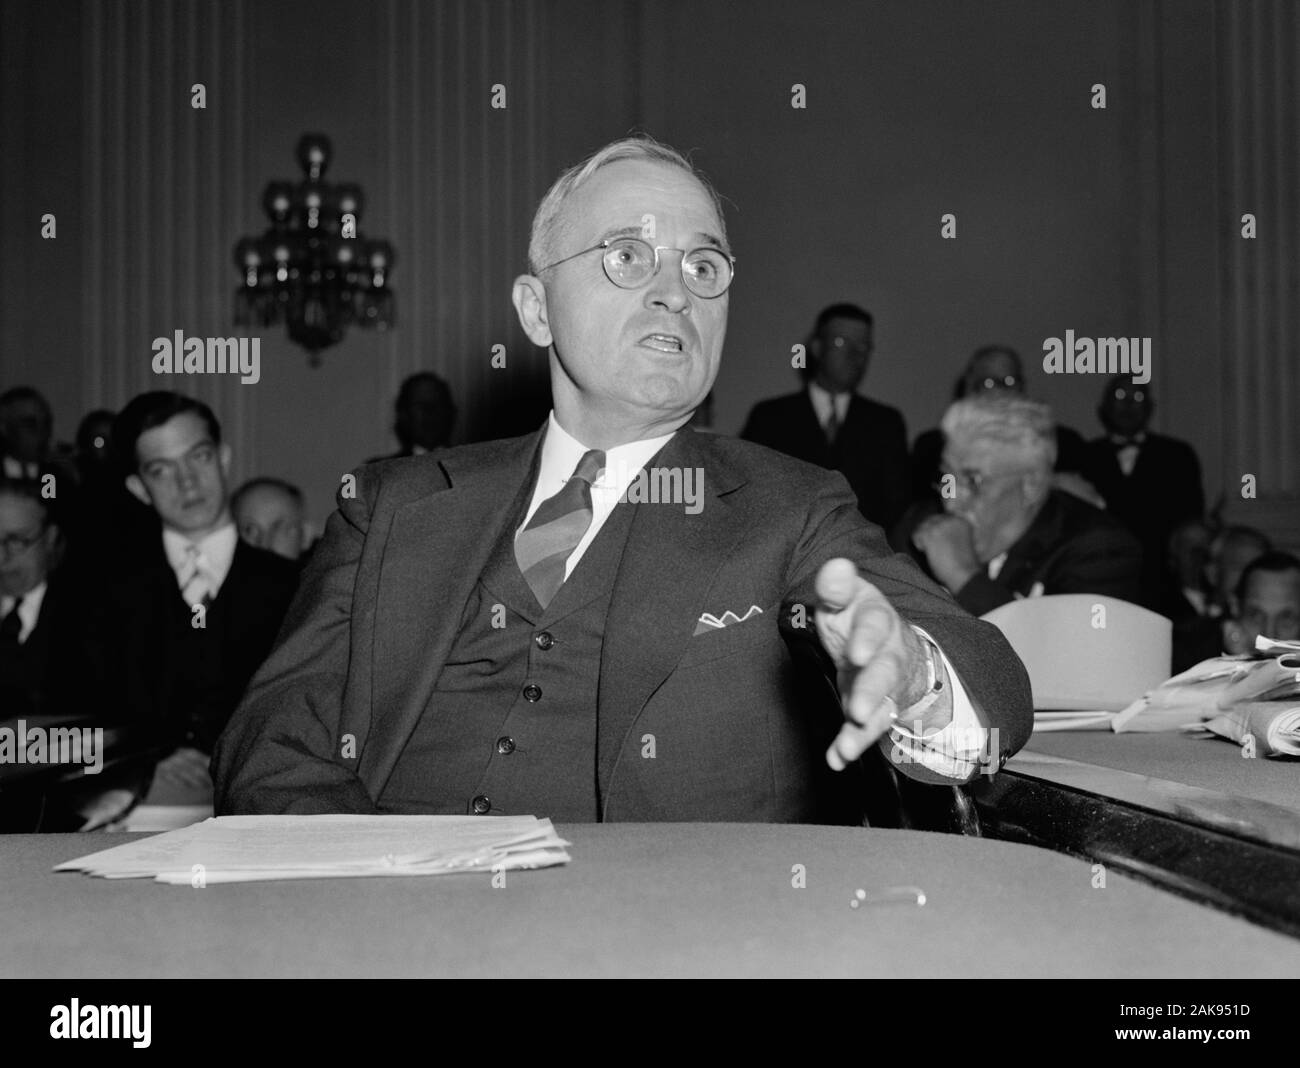 Vintage photo of Missouri Senator - and future President - Harry S Truman speaking at a meeting at the Capitol in Washington DC. Photo by Harris & Ewing taken on October 14 1938. Truman (1884 – 1972) would later become the 33rd US President (1945 – 1953). Stock Photo